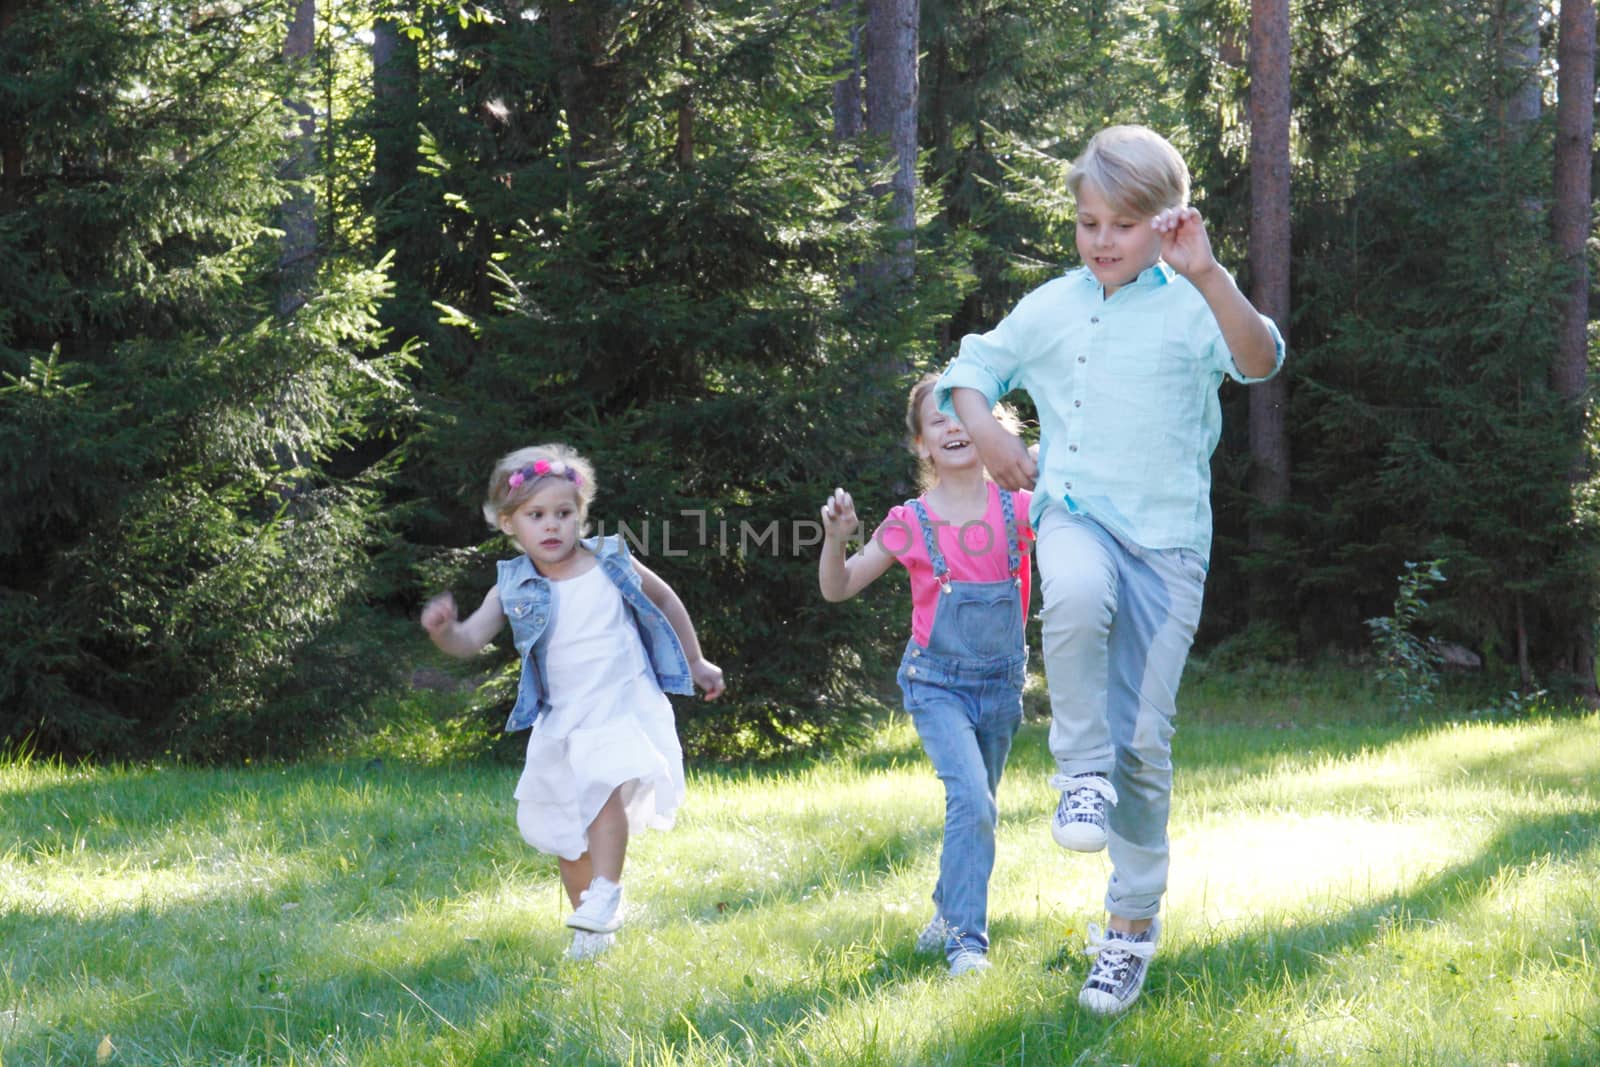 Group of young children running towards camera in park